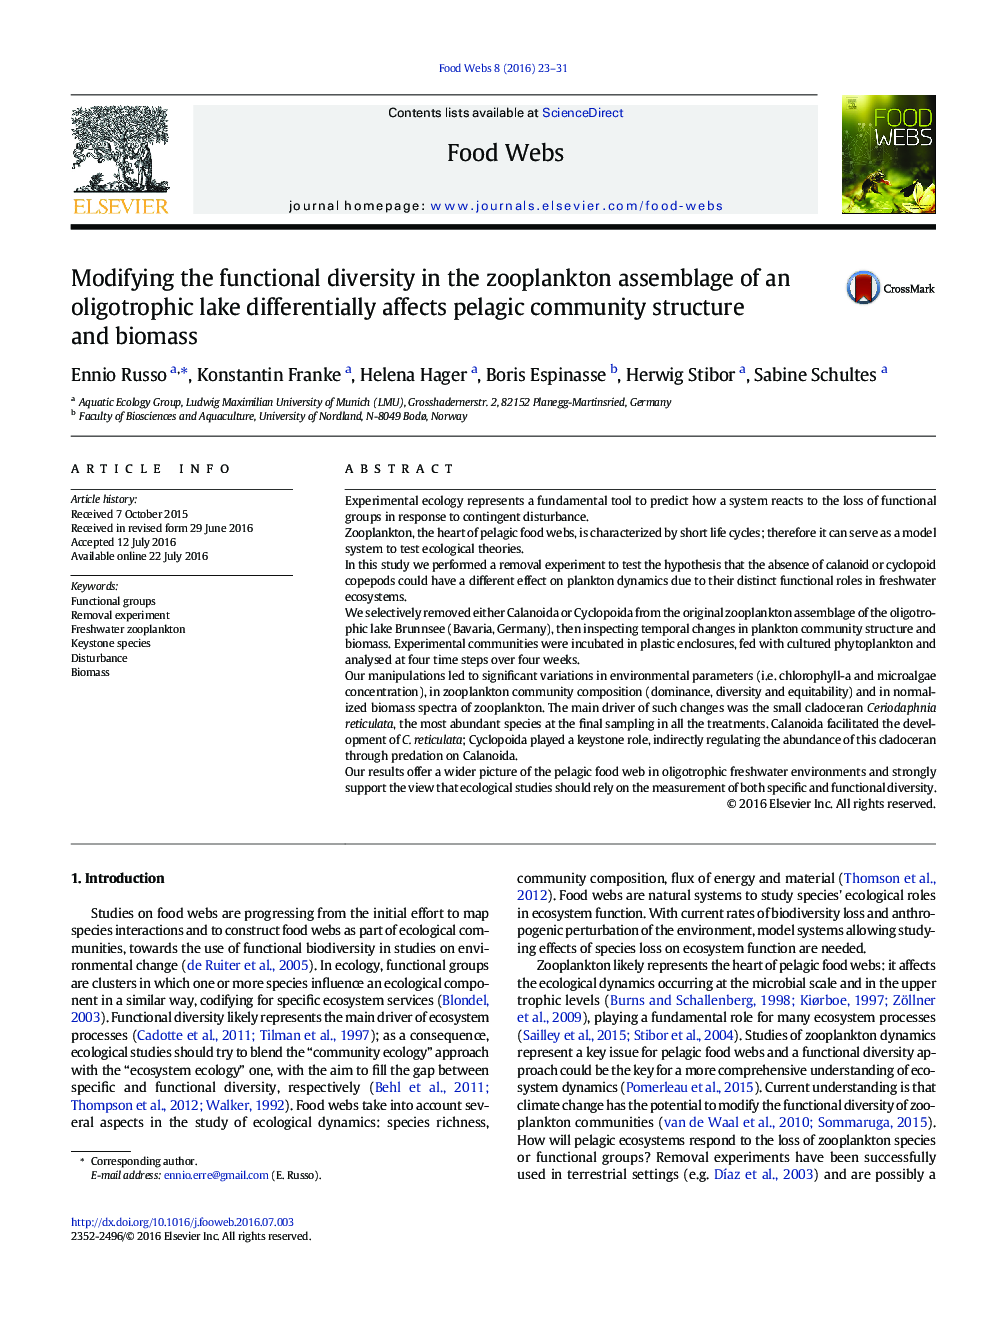 Modifying the functional diversity in the zooplankton assemblage of an oligotrophic lake differentially affects pelagic community structure and biomass